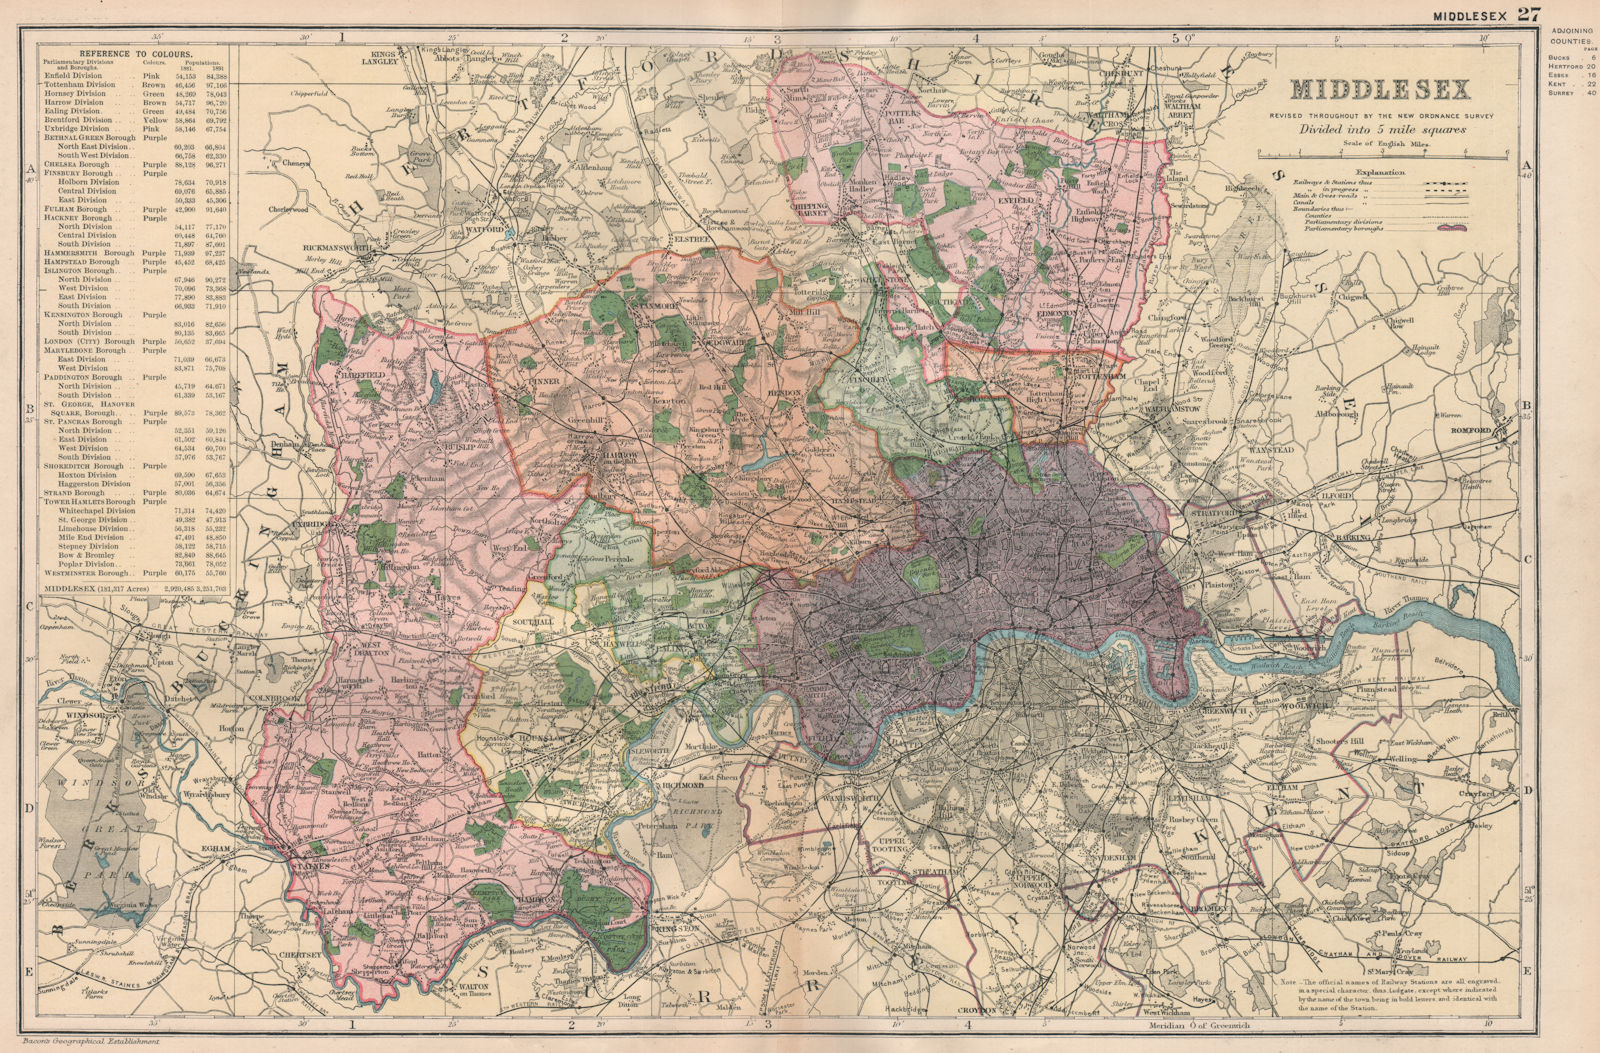 MIDDLESEX.Showing Parliamentary divisions,boroughs & parks.London.BACON 1896 map